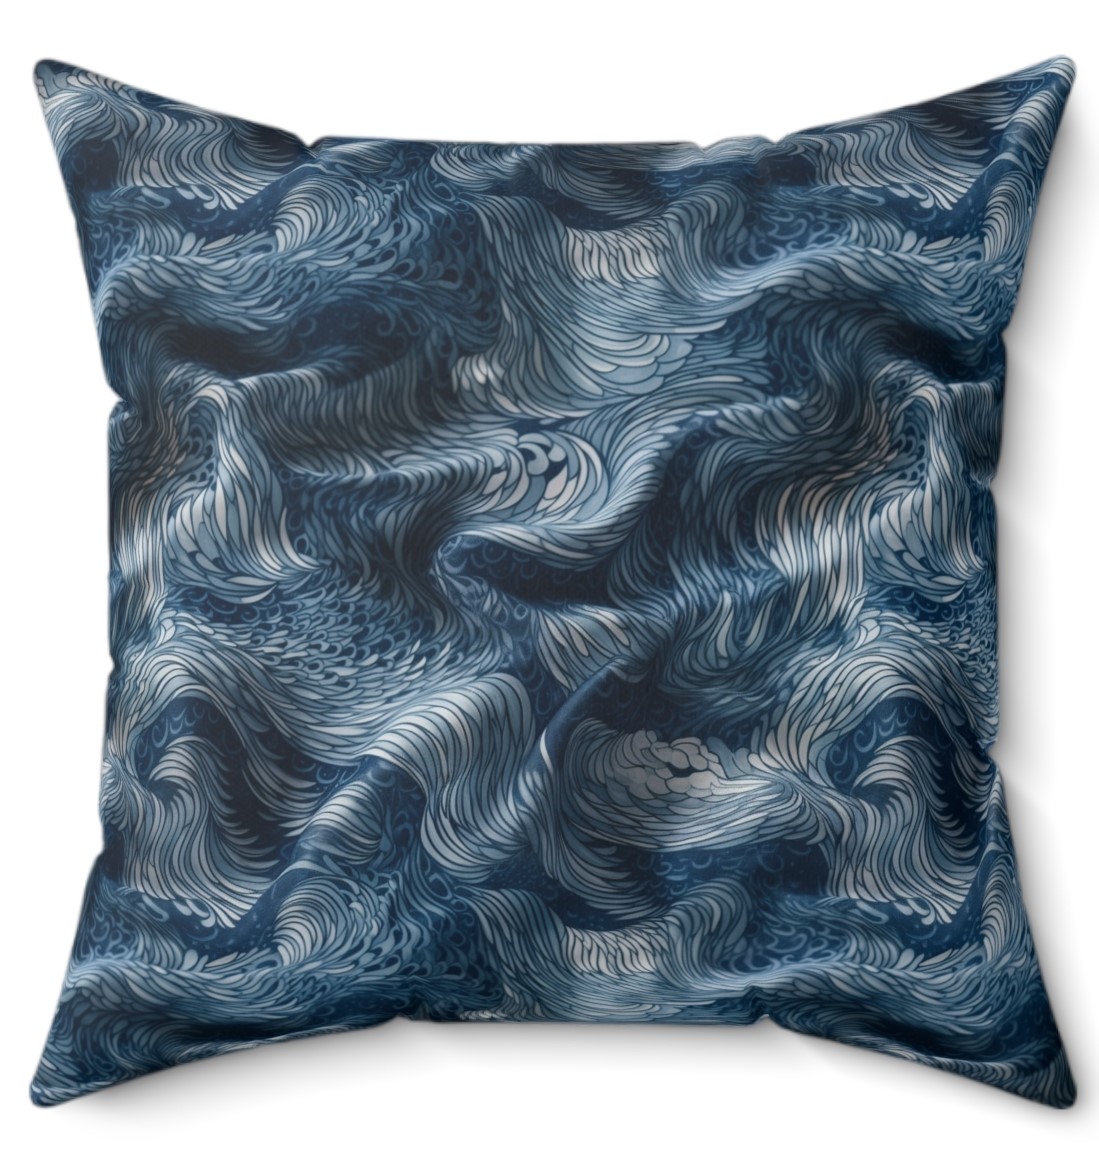 Close-up of the Ugandan Blue Wave Microfiber Square Pillow, showcasing the intricate blue wave design